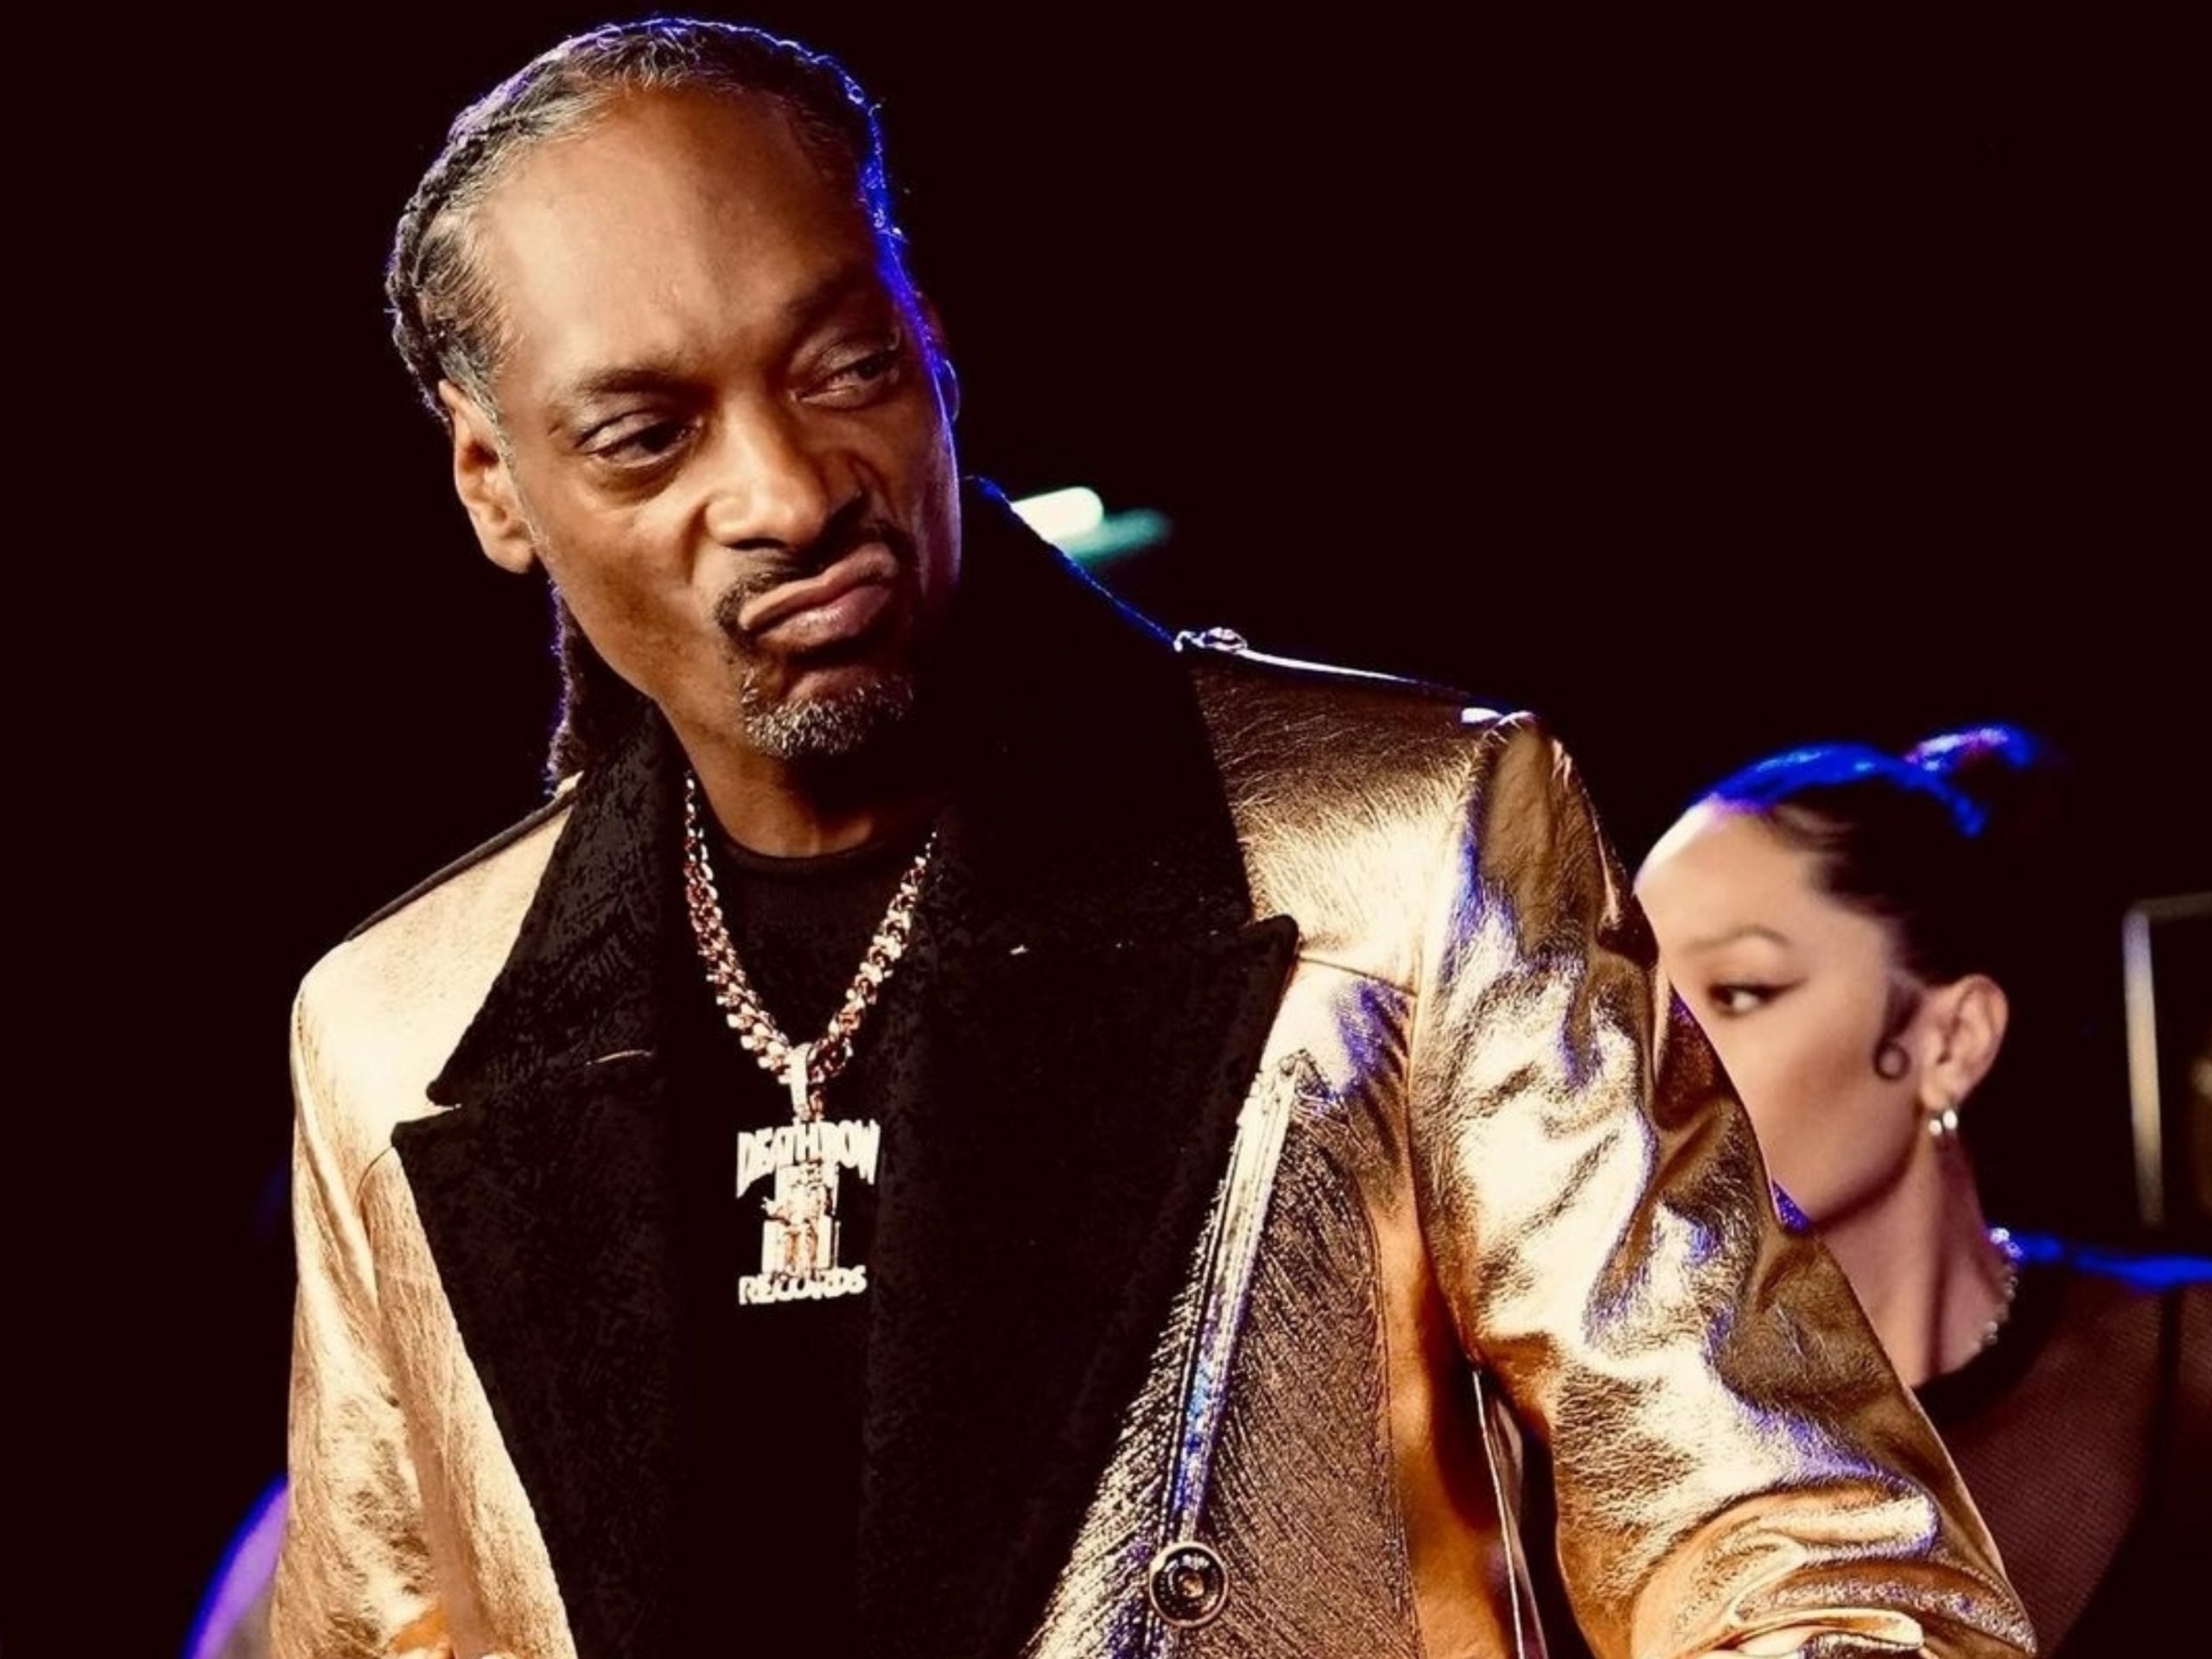 Snoop Dogg Biopic in the Works with Universal Pictures